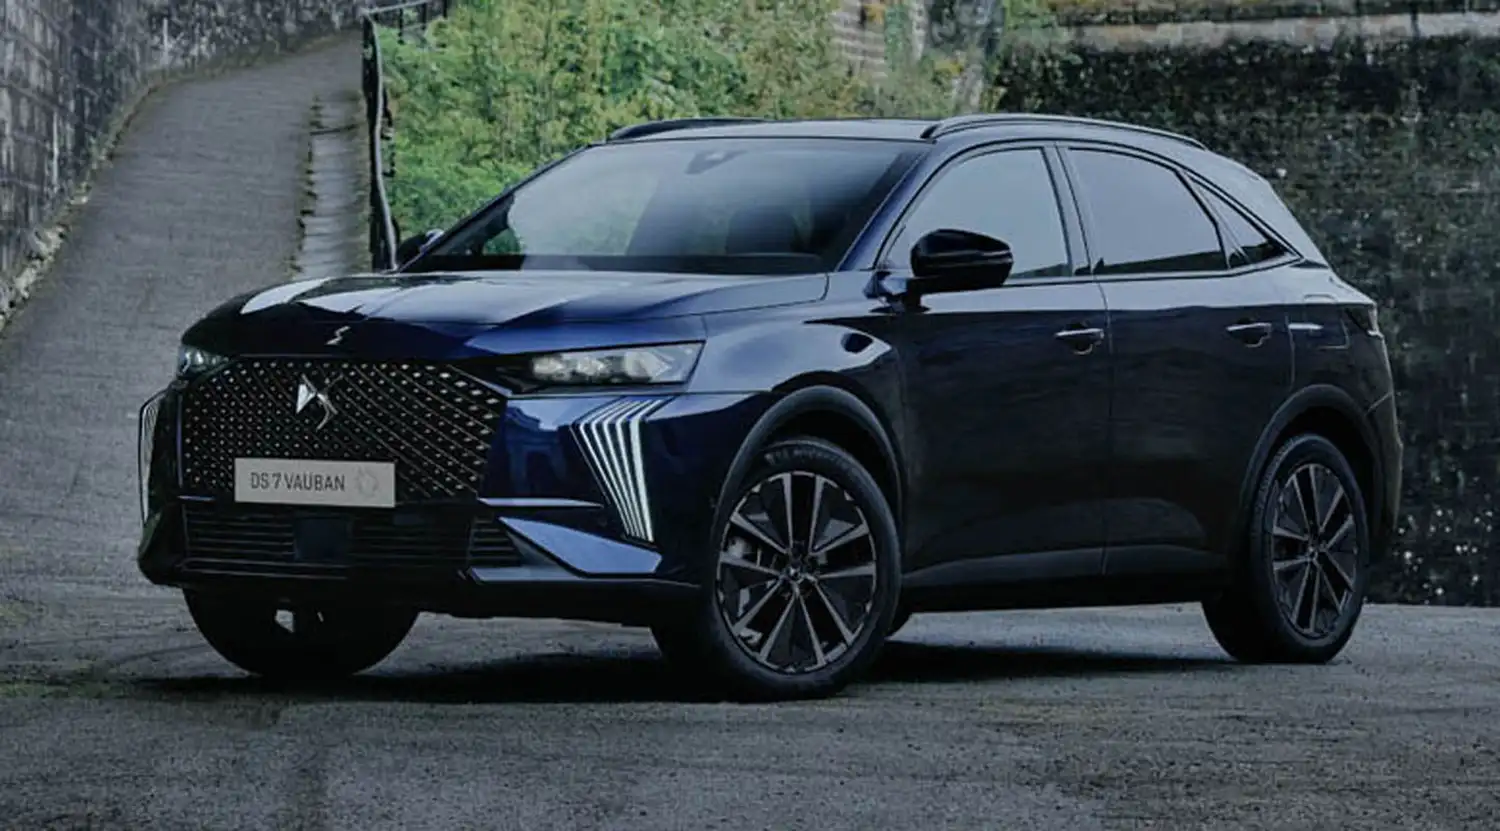 DS 7 E-TENSE 4×4 300 VAUBAN – A New Benchmark in Protected Vehicles